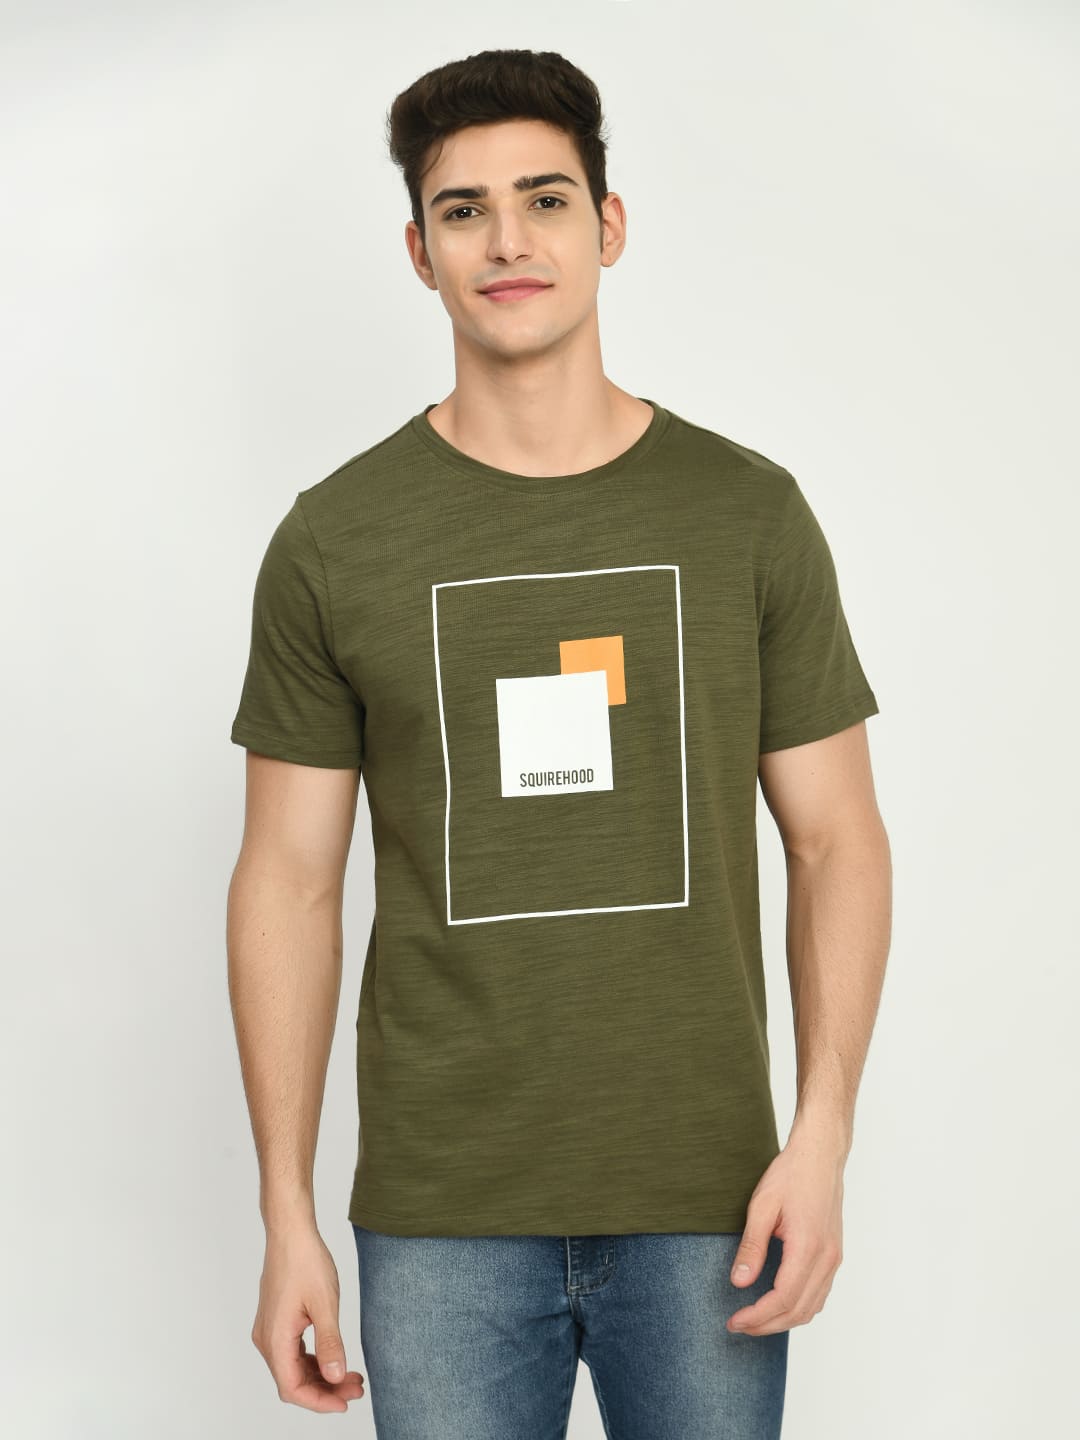 Men's Army Graphic Printed T-Shirt